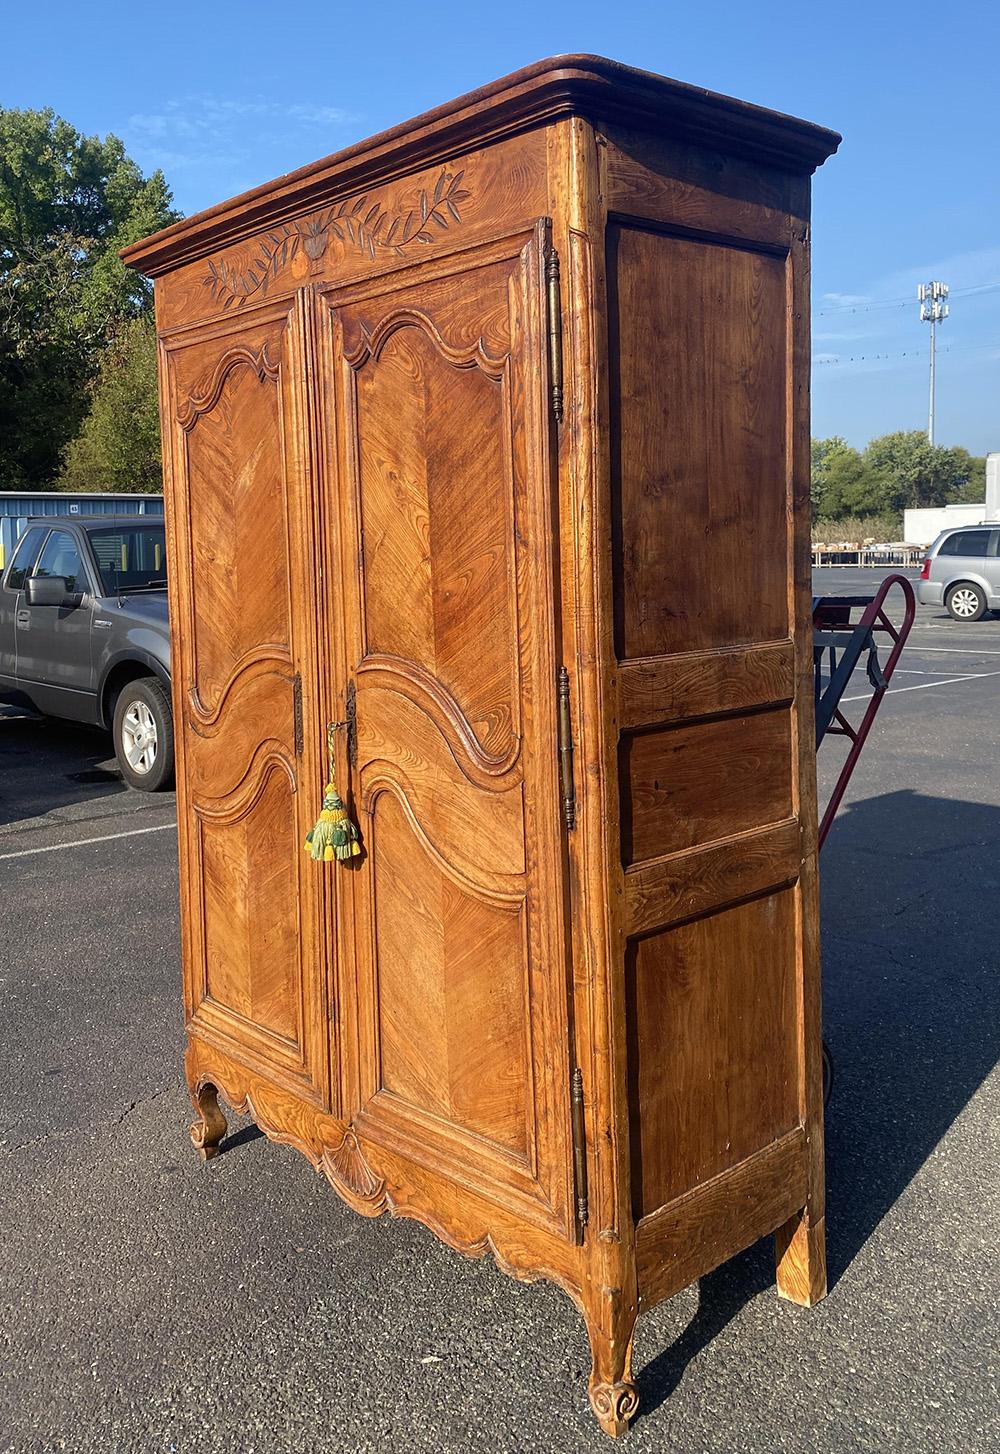 This is a superb and time-worn armoire with fantastic chestnut in it's original patina with all of the signs of age, wear and history that one would expect from such a beautiful armoire. These antique pieces always have such wonderful old damages